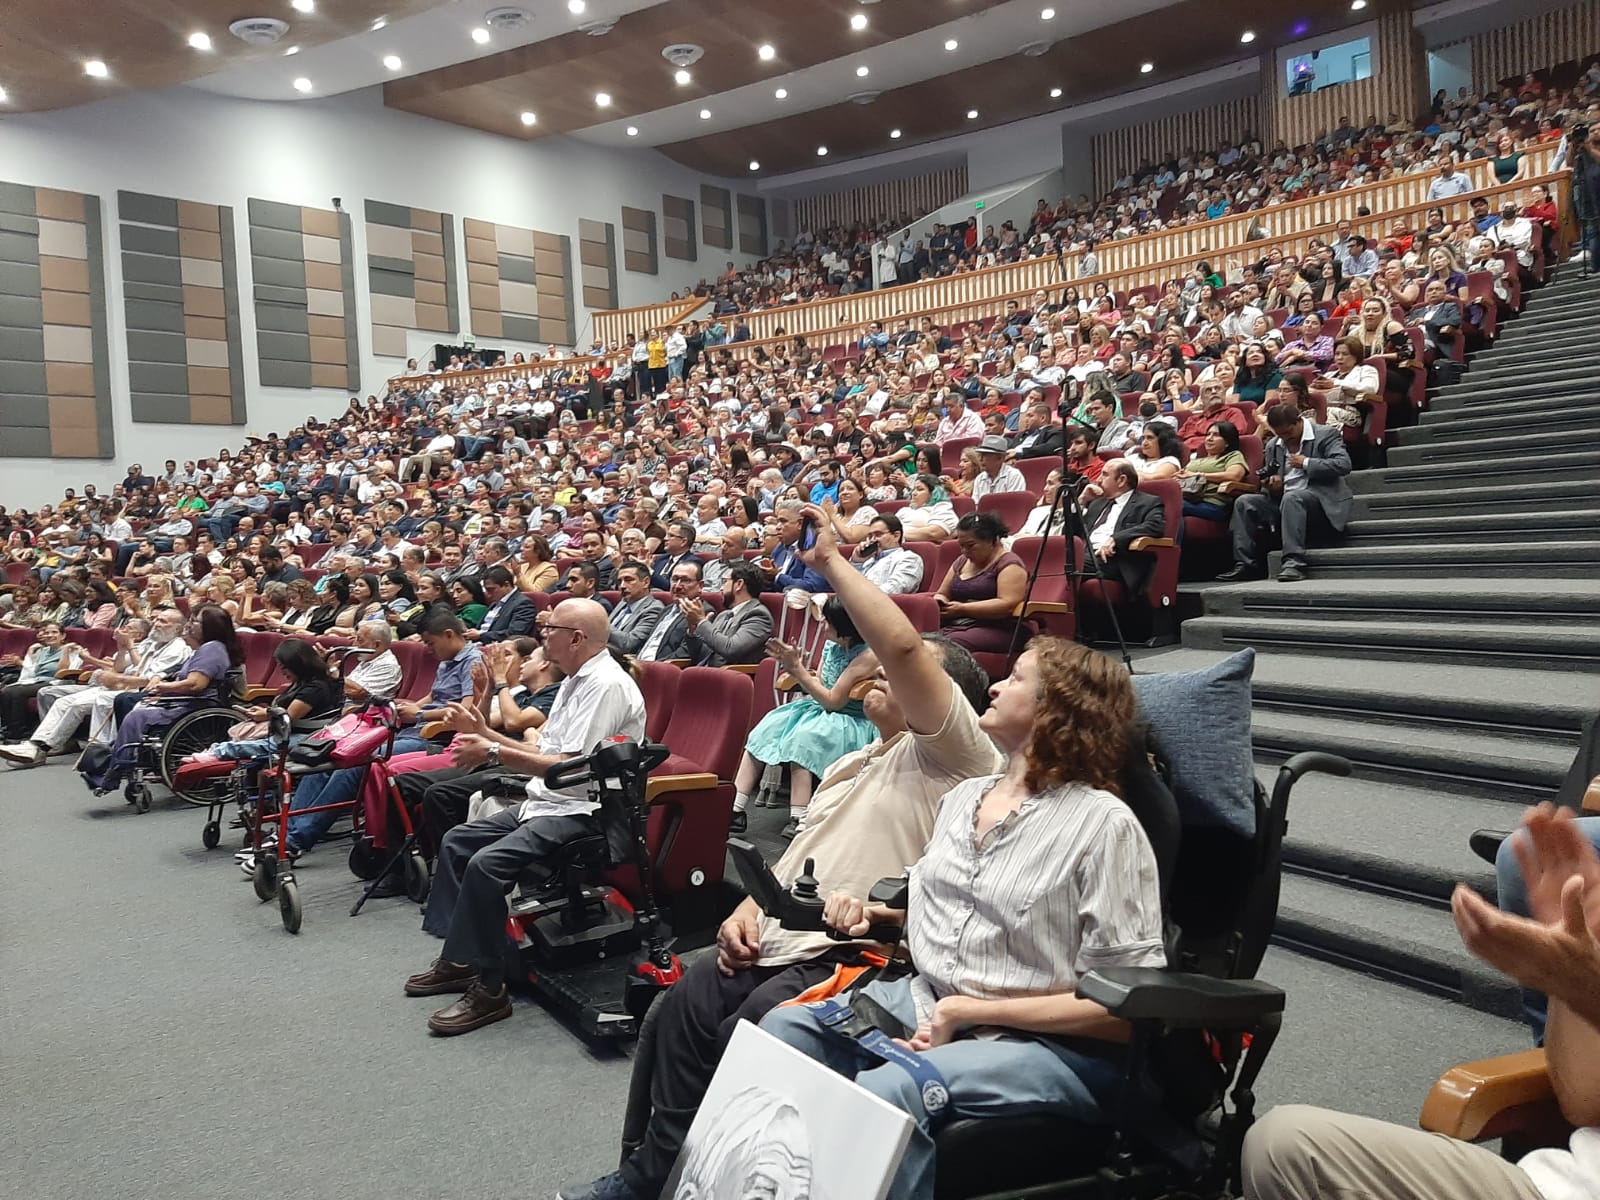 For the award ceremony, the 600-seat auditorium was overflowing. Lots of disabled friends attended. In the foreground in her wheelchair is Lilí Chaidez, with a portrait of me she painted with her mouth. (See below.)